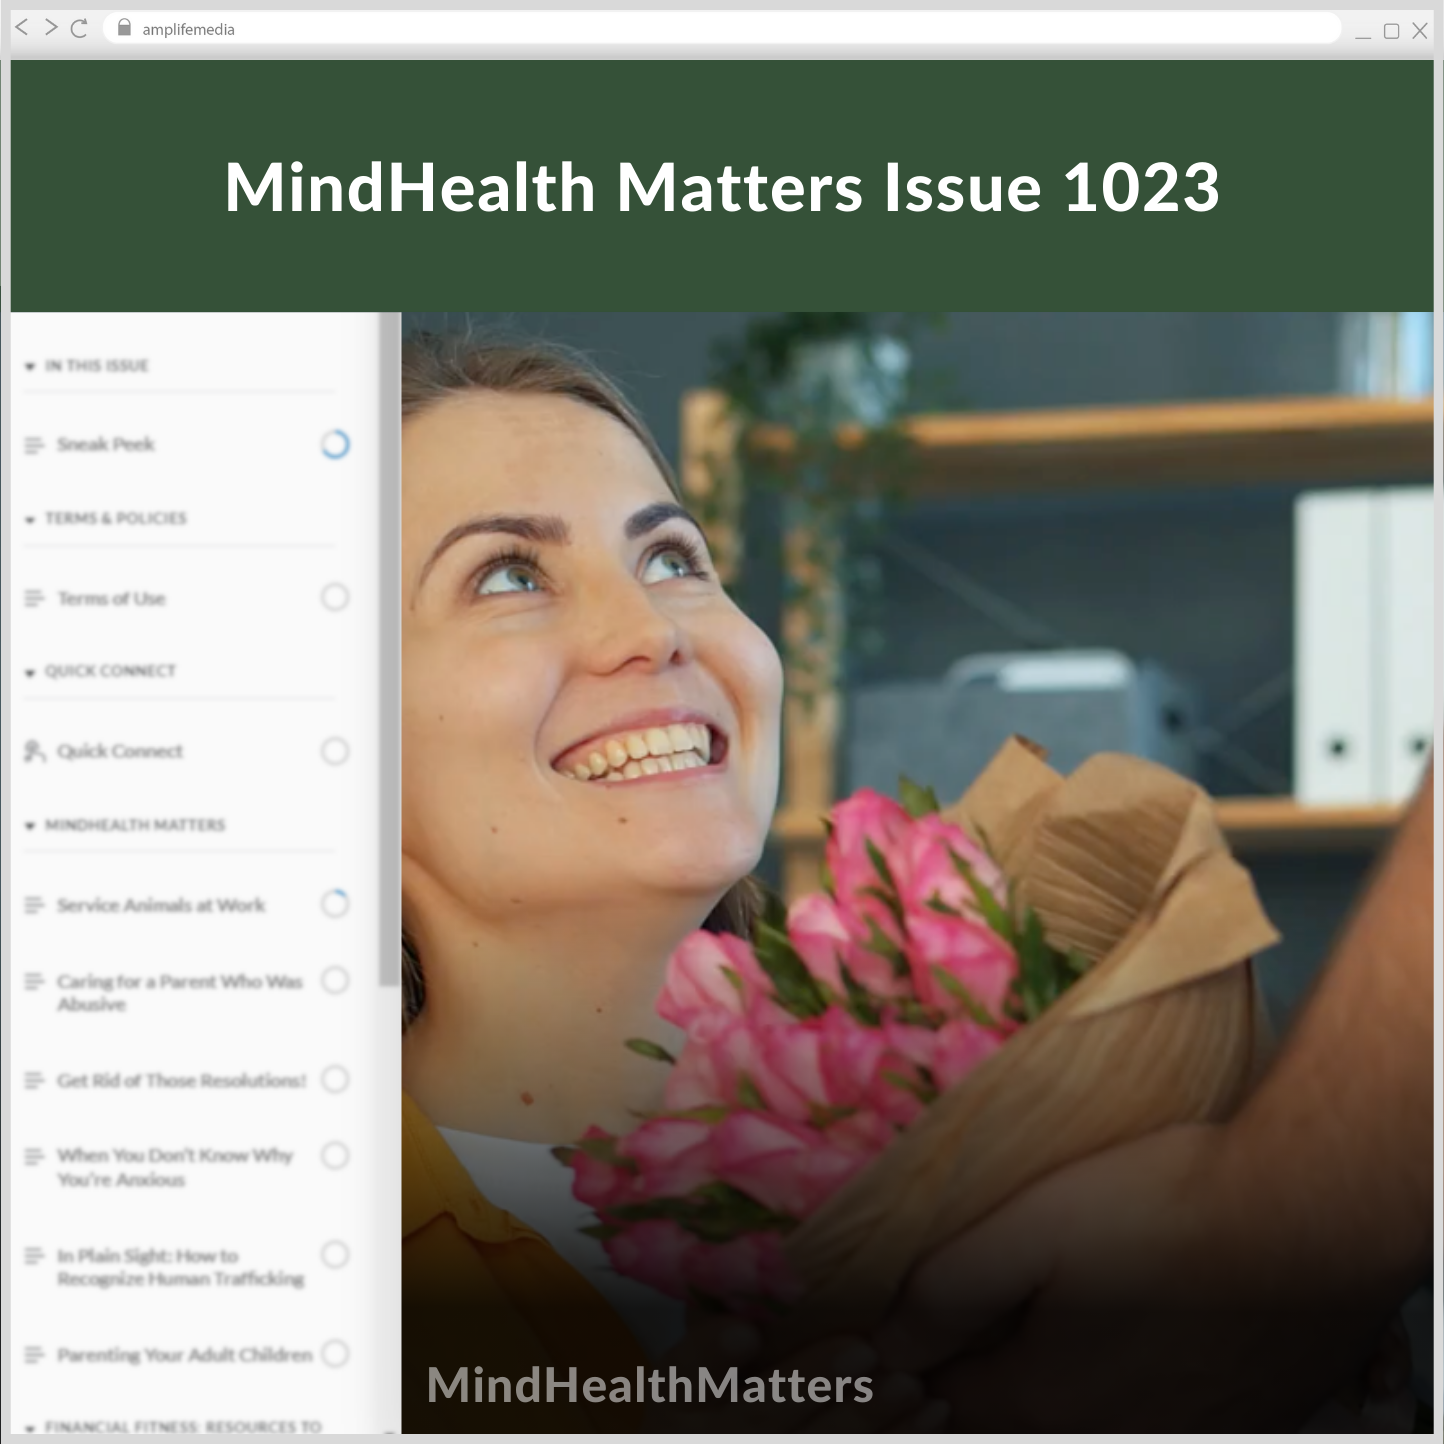 Subscription to Wellbeing Media: MindHealth Matters 1023